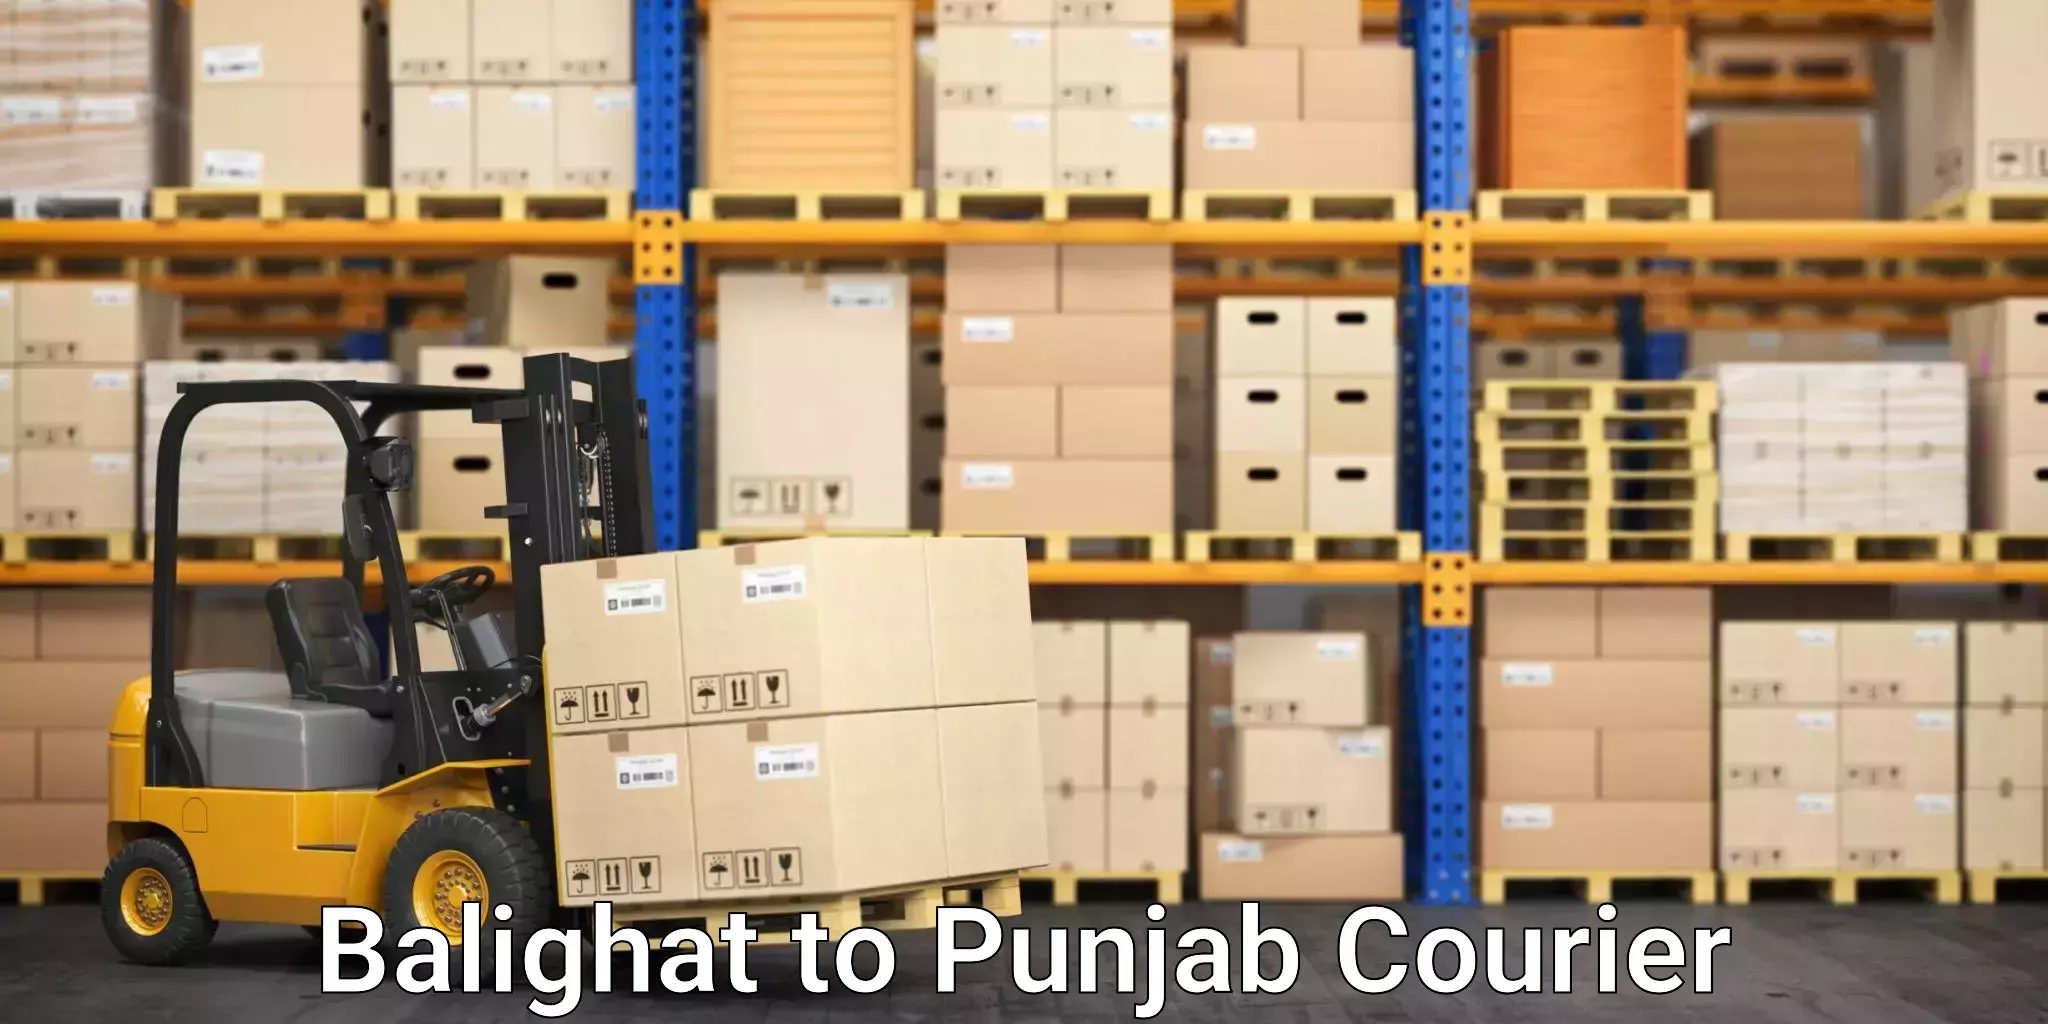 Comprehensive shipping network in Balighat to Central University of Punjab Bathinda